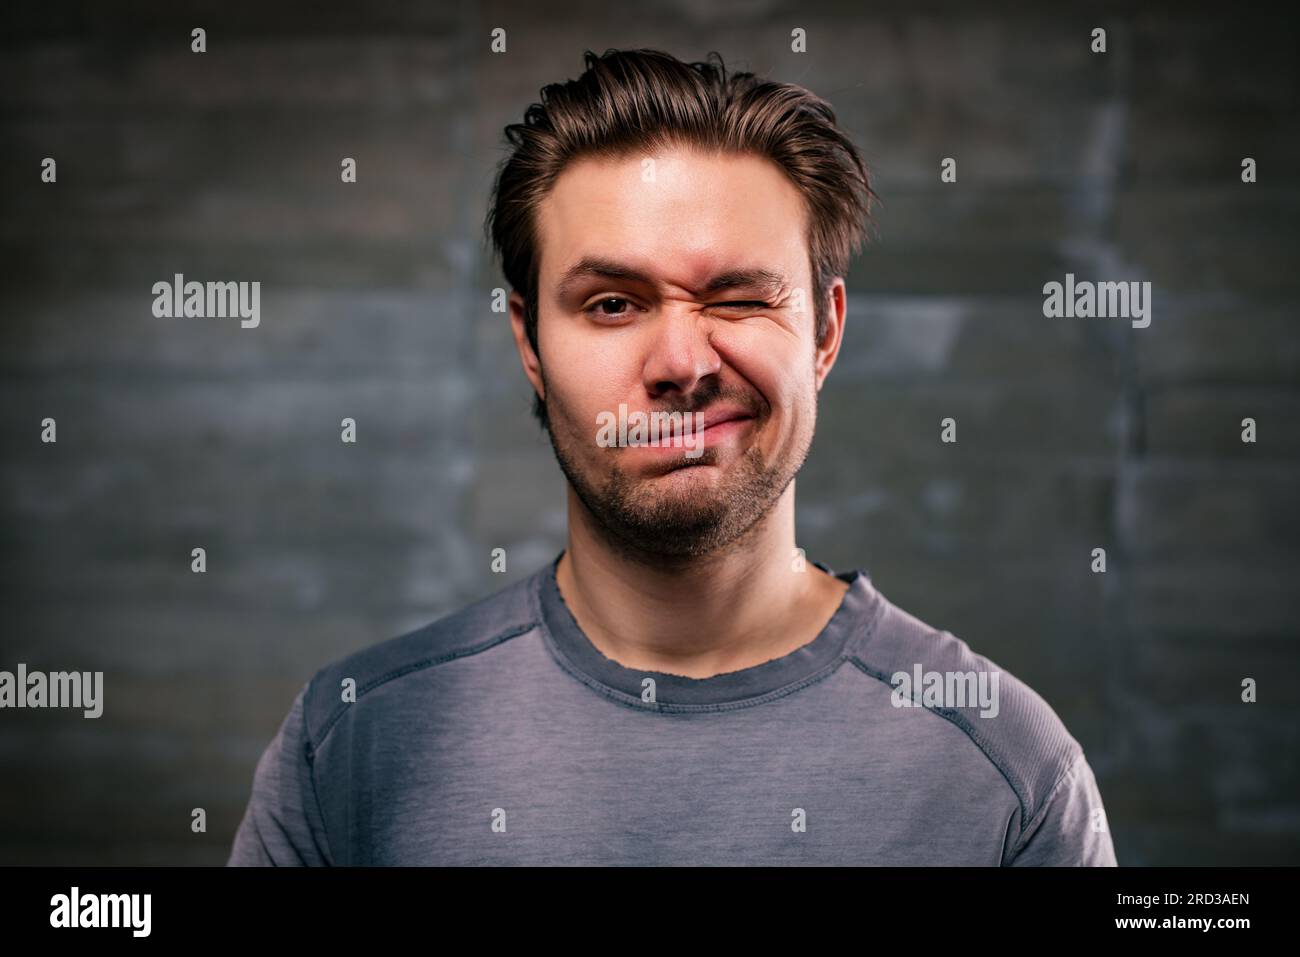 Young handsome man blinking portrait on gray wall background Stock Photo